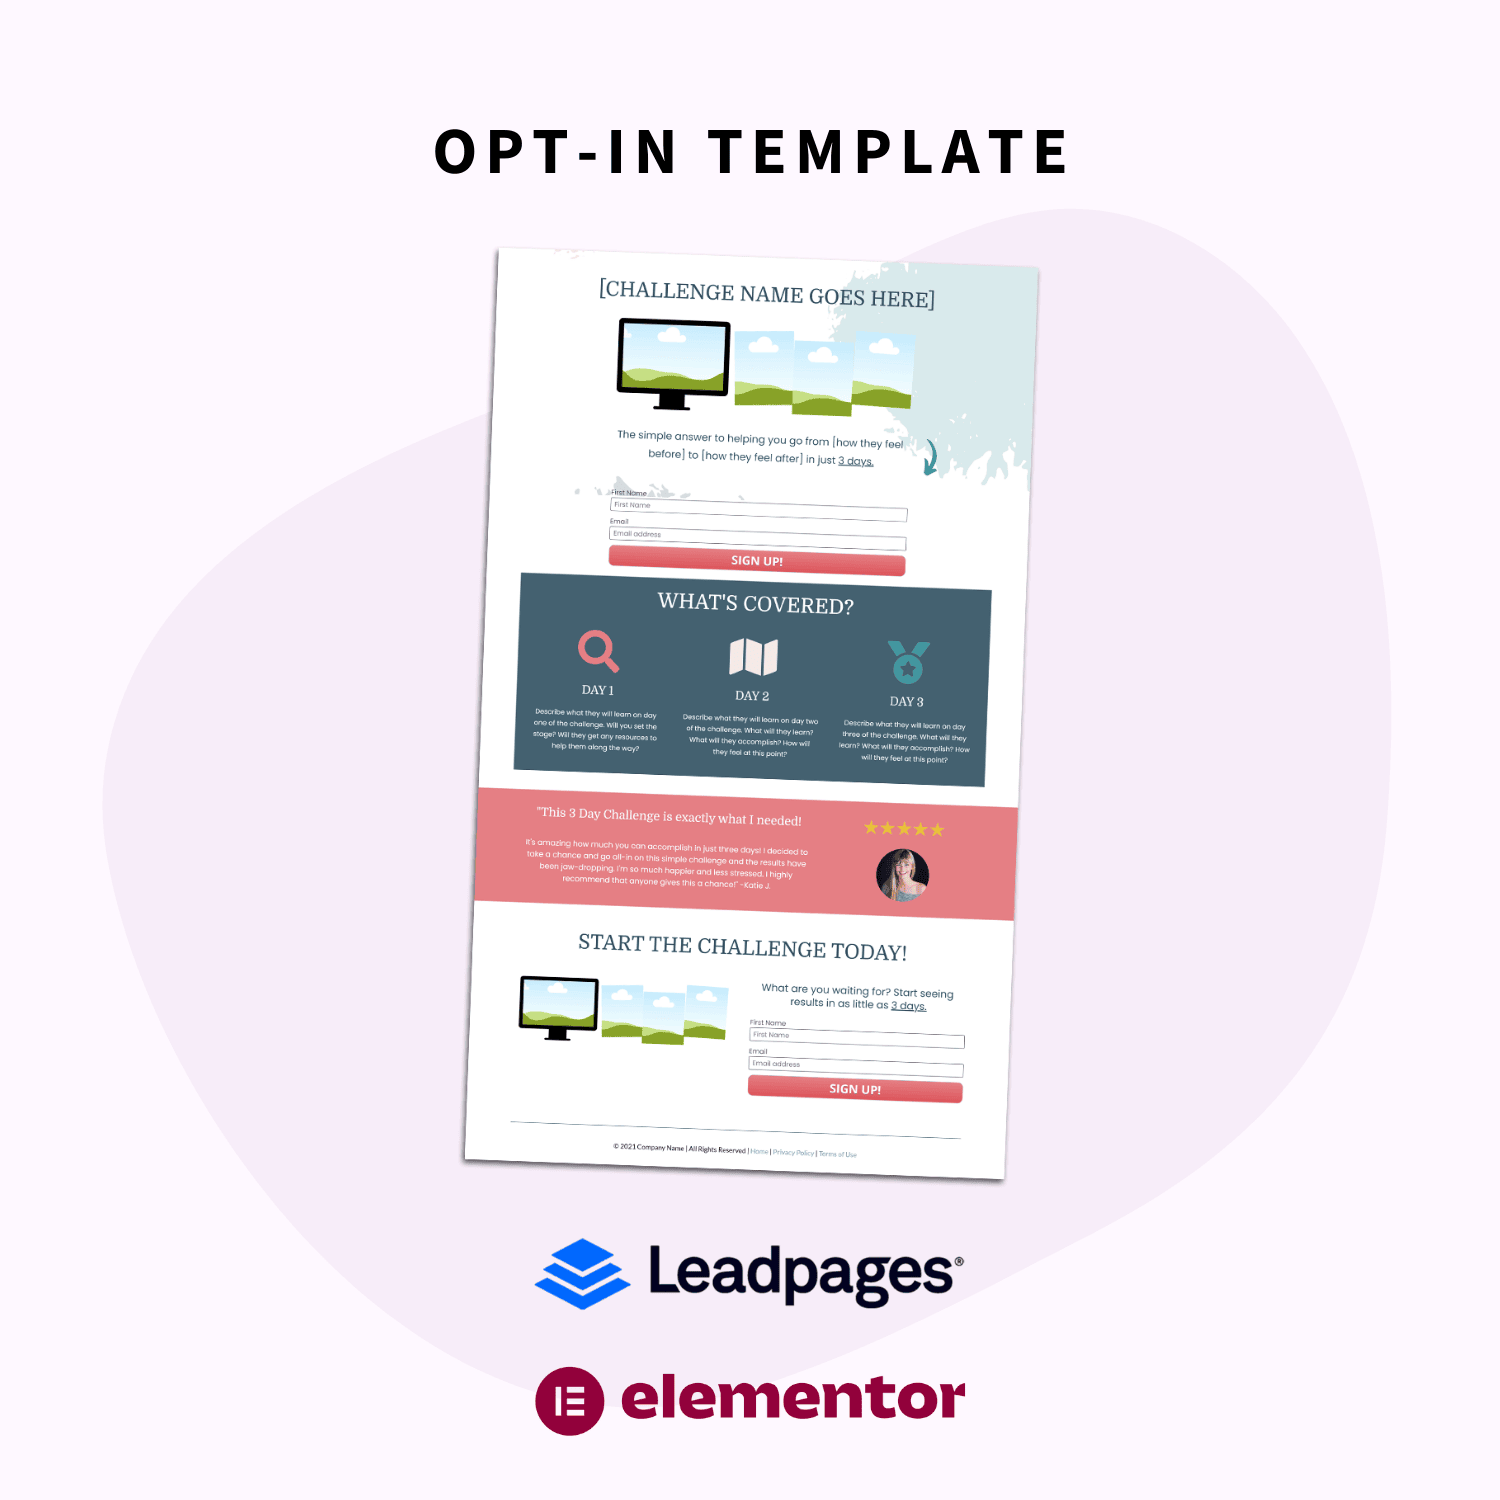 opt-in template inside the Grow your email list with a free challenge toolbox for Leadpages and Elementor